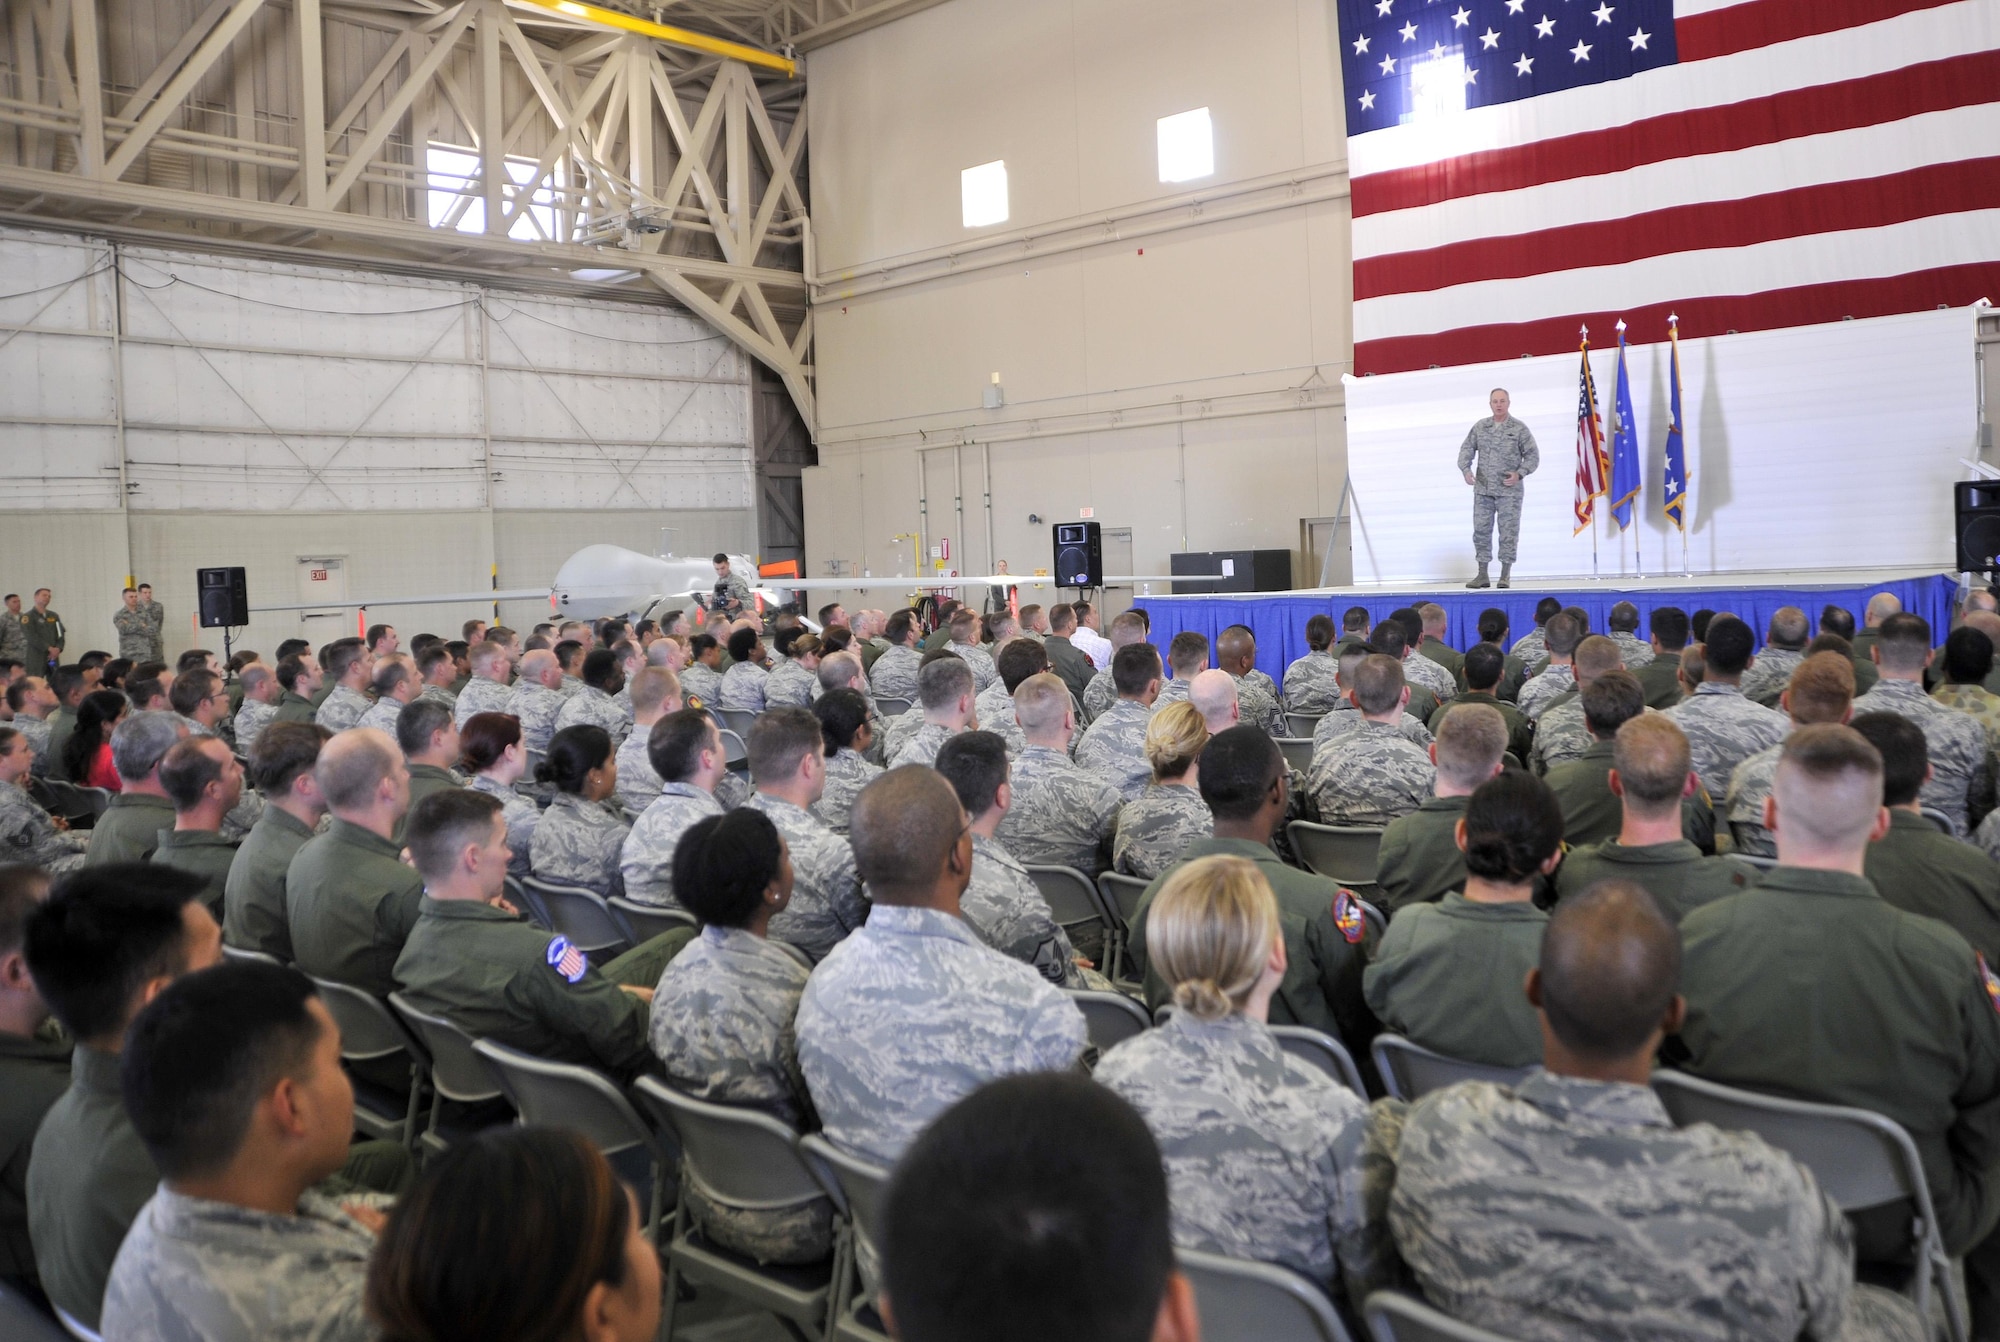 Chief of Staff of the Air Force Gen. Mark A. Welsh III conducts an all-call with the men and women of the 432nd Wing/432nd Air Expeditionary Wing March 24, 2015, at Creech Air Force Base, Nevada. During the all-call, Welsh thanked and highlighted the successes of the men and women of Creech AFB and the importance of the intelligence, surveillance and reconnaissance mission. (U.S. Air Force photo/Airman 1st Class Christian Clausen)